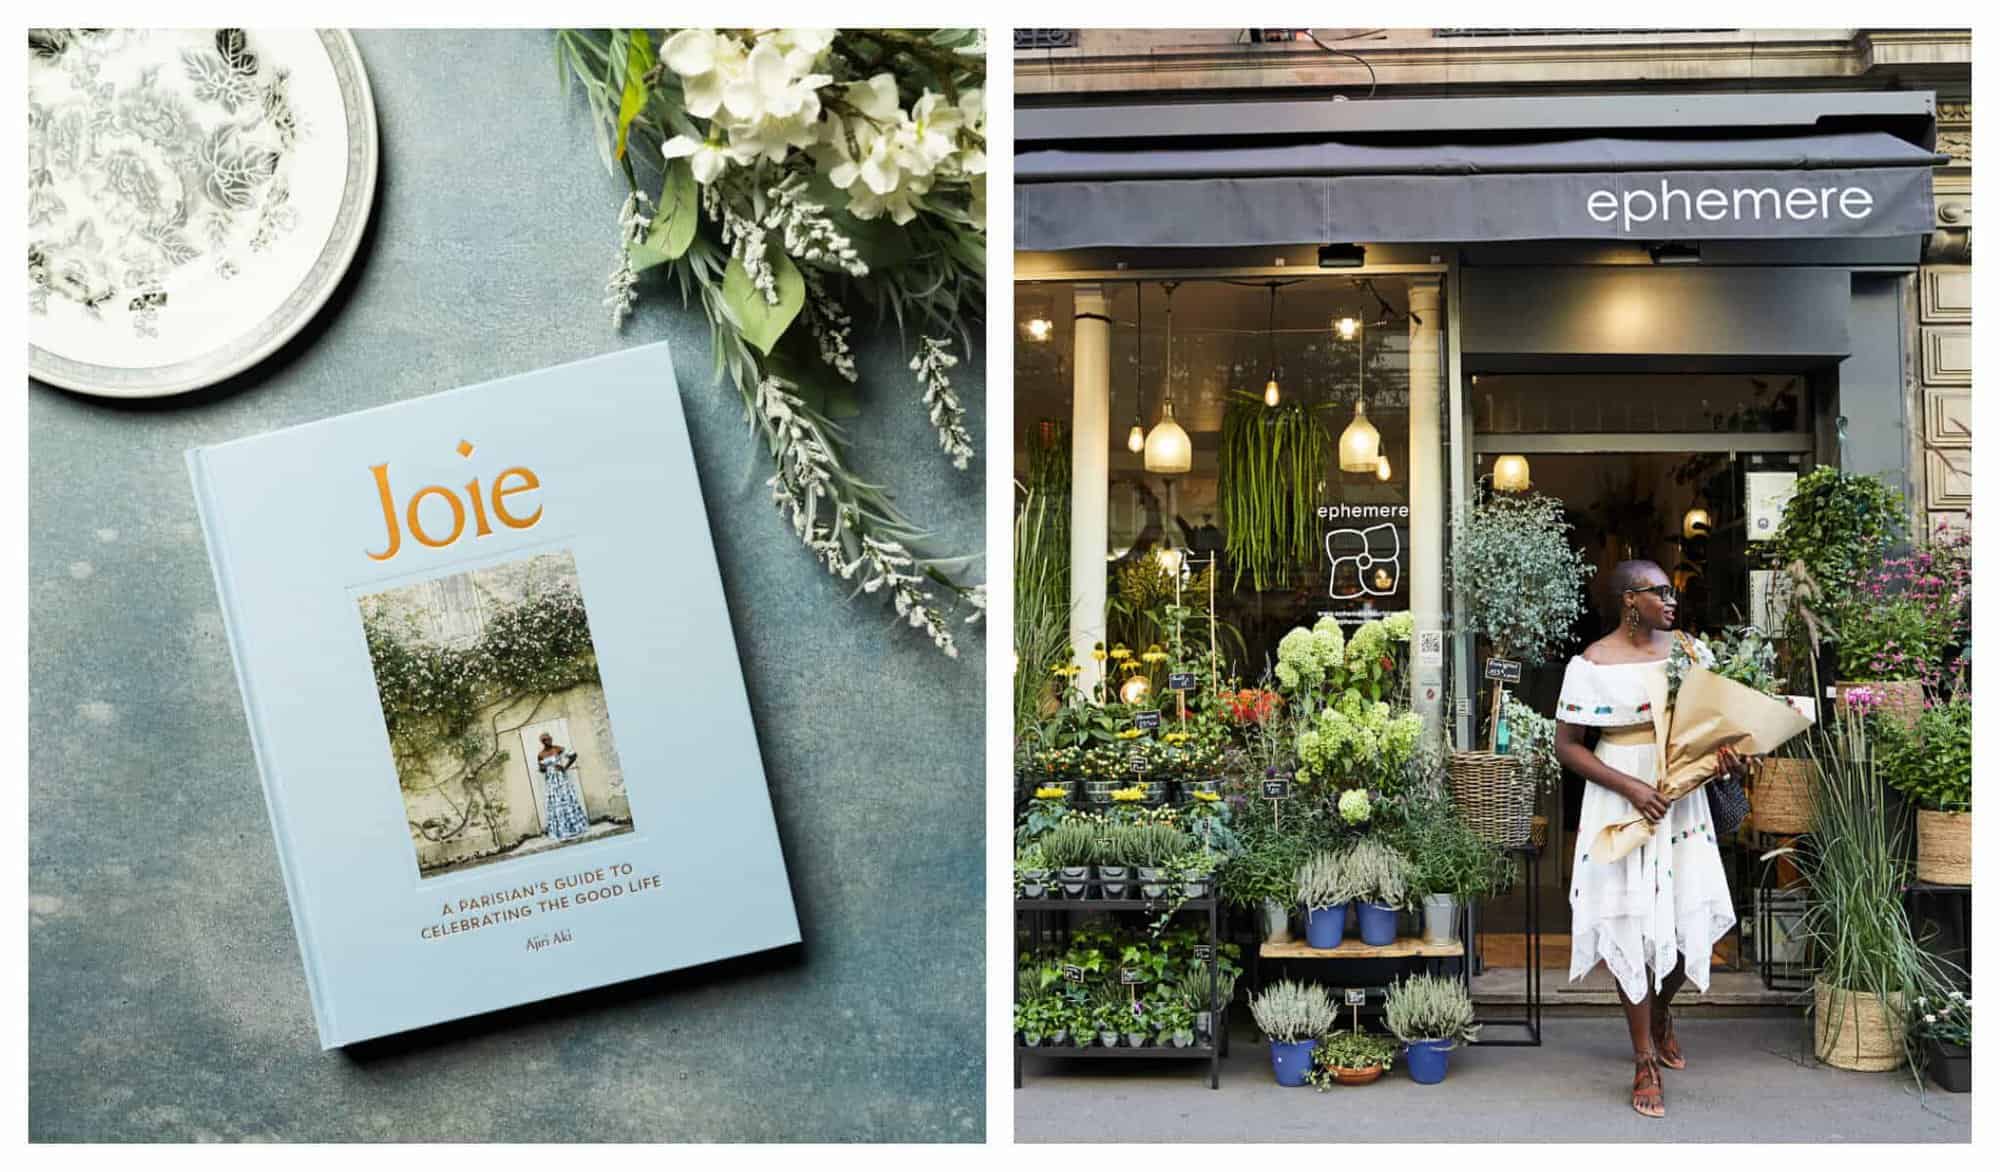 Left: A blue book on a gray table. Right: A woman holds a bouquet of flowers in a flower shop.